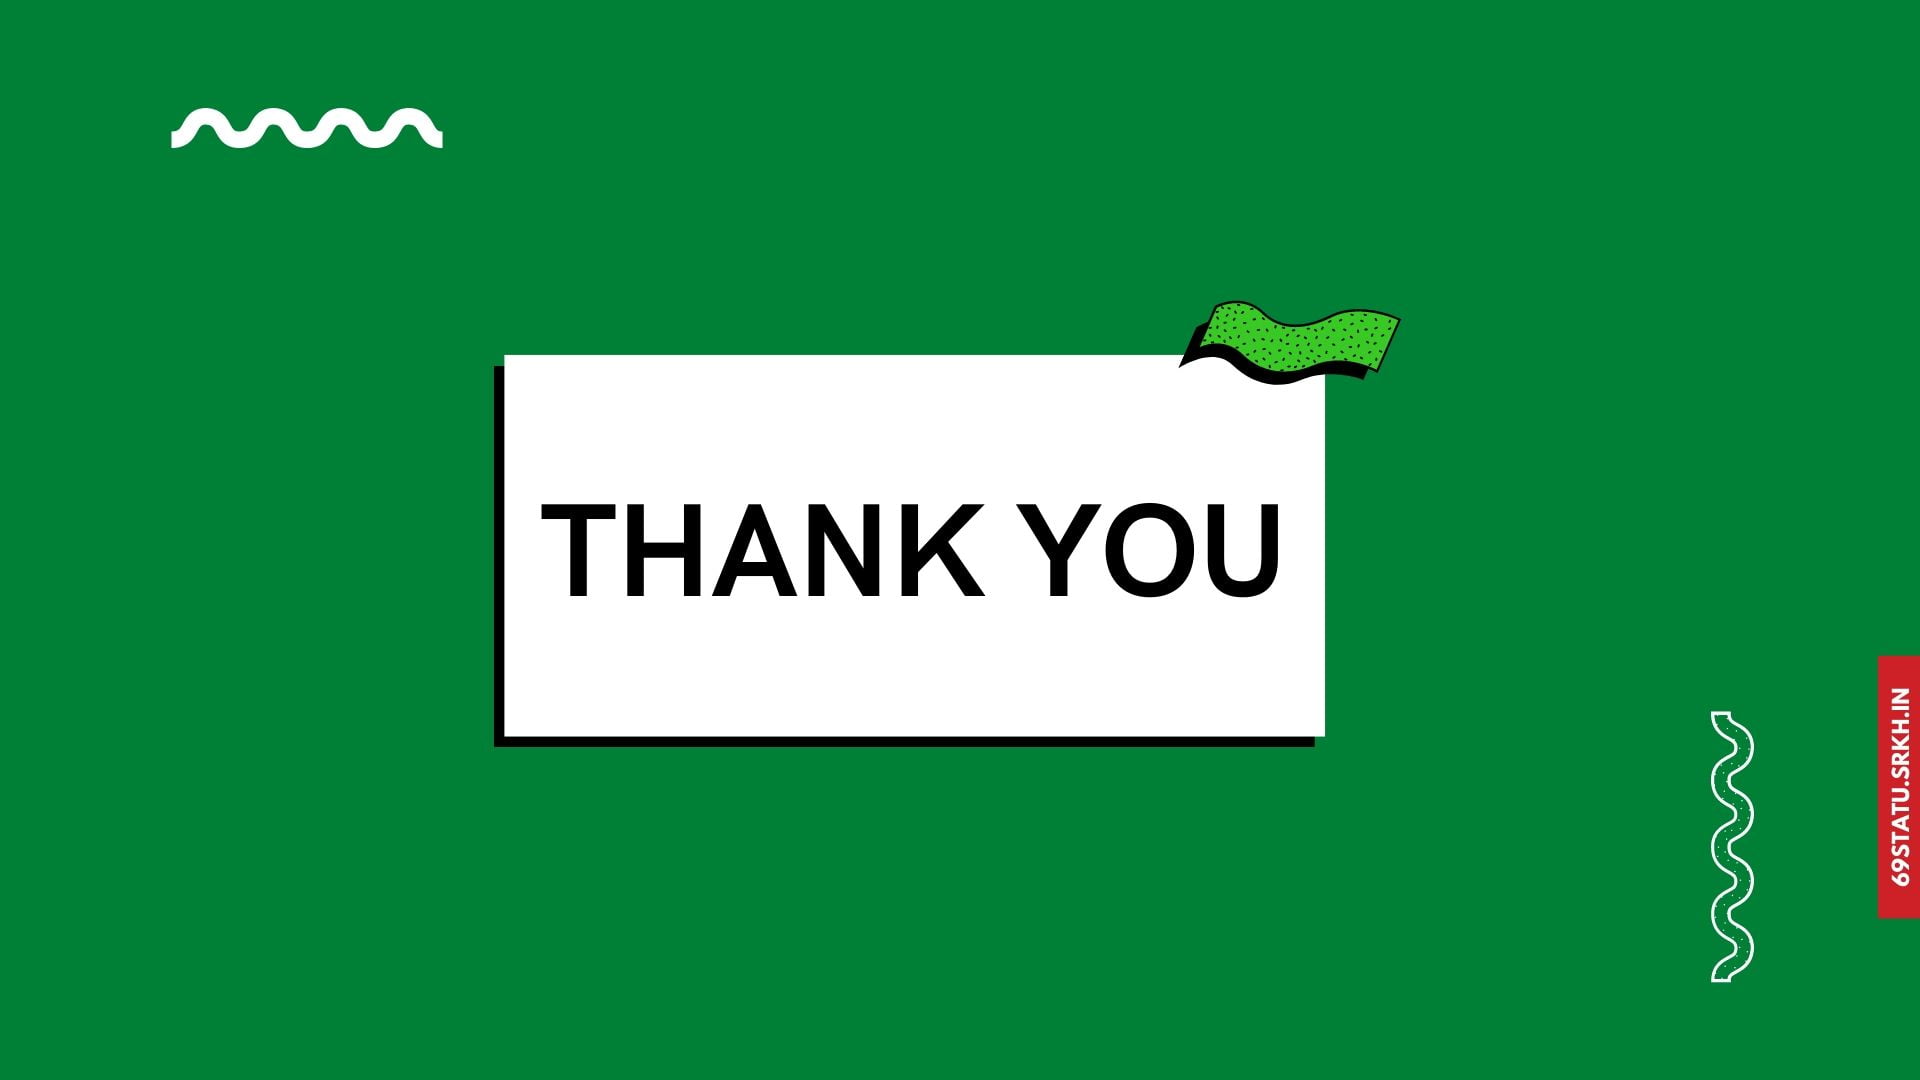 Thank You Images for Presentation in Green